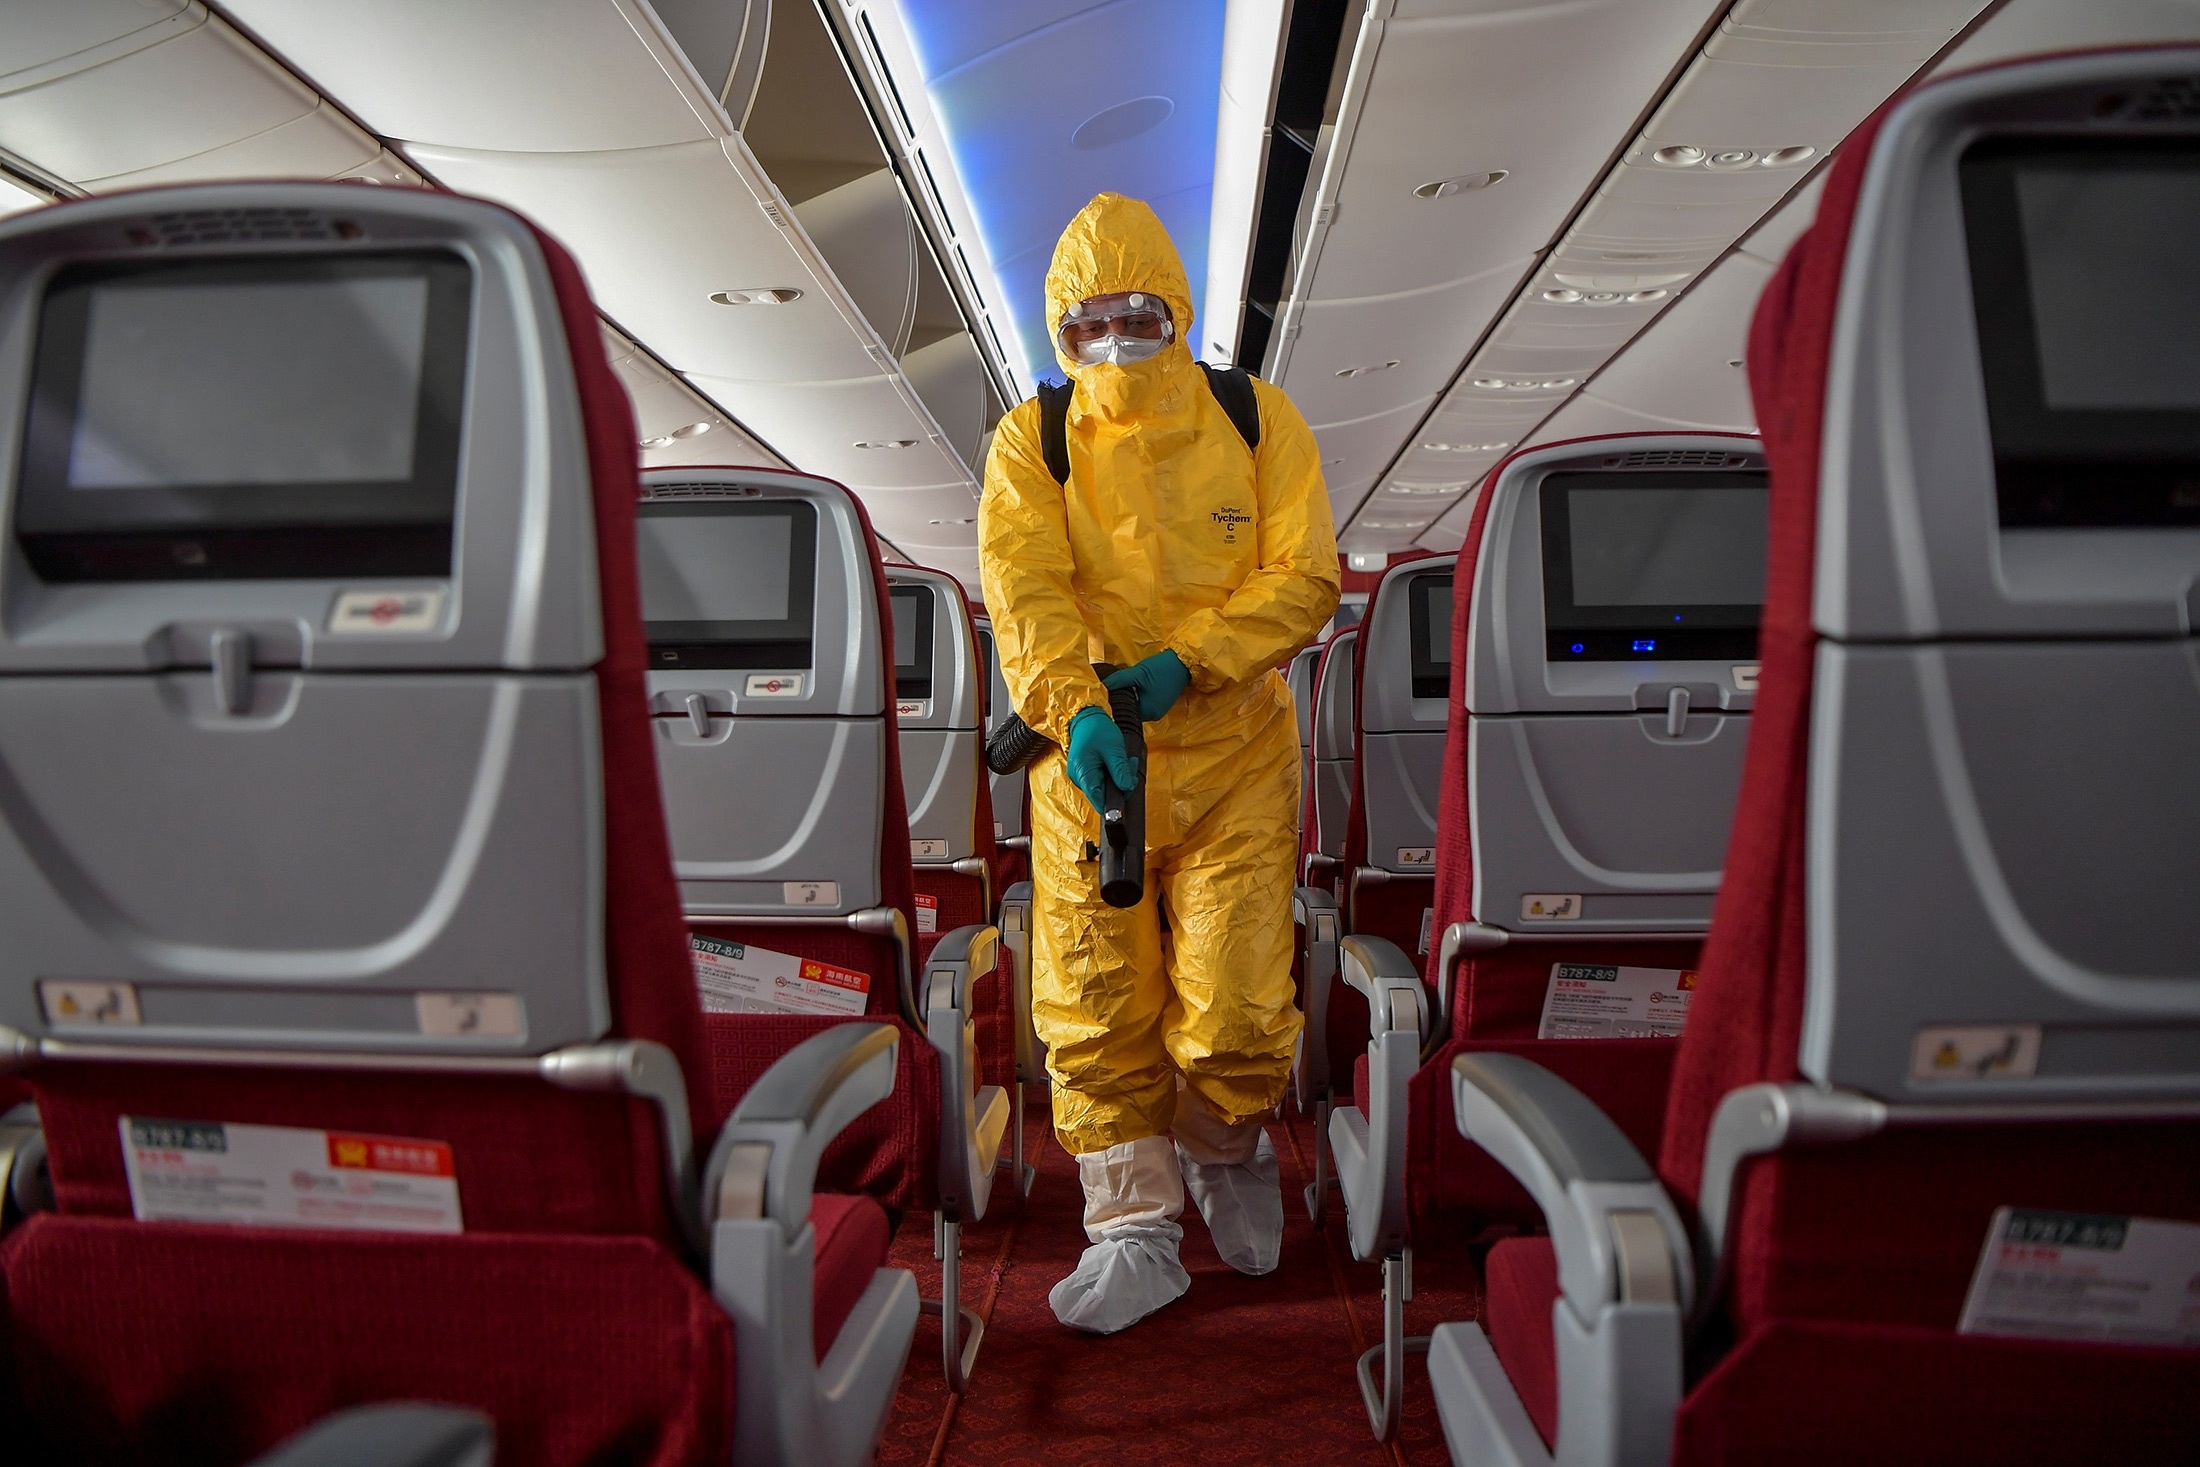 Disinfecting a Hainan Airlines flight